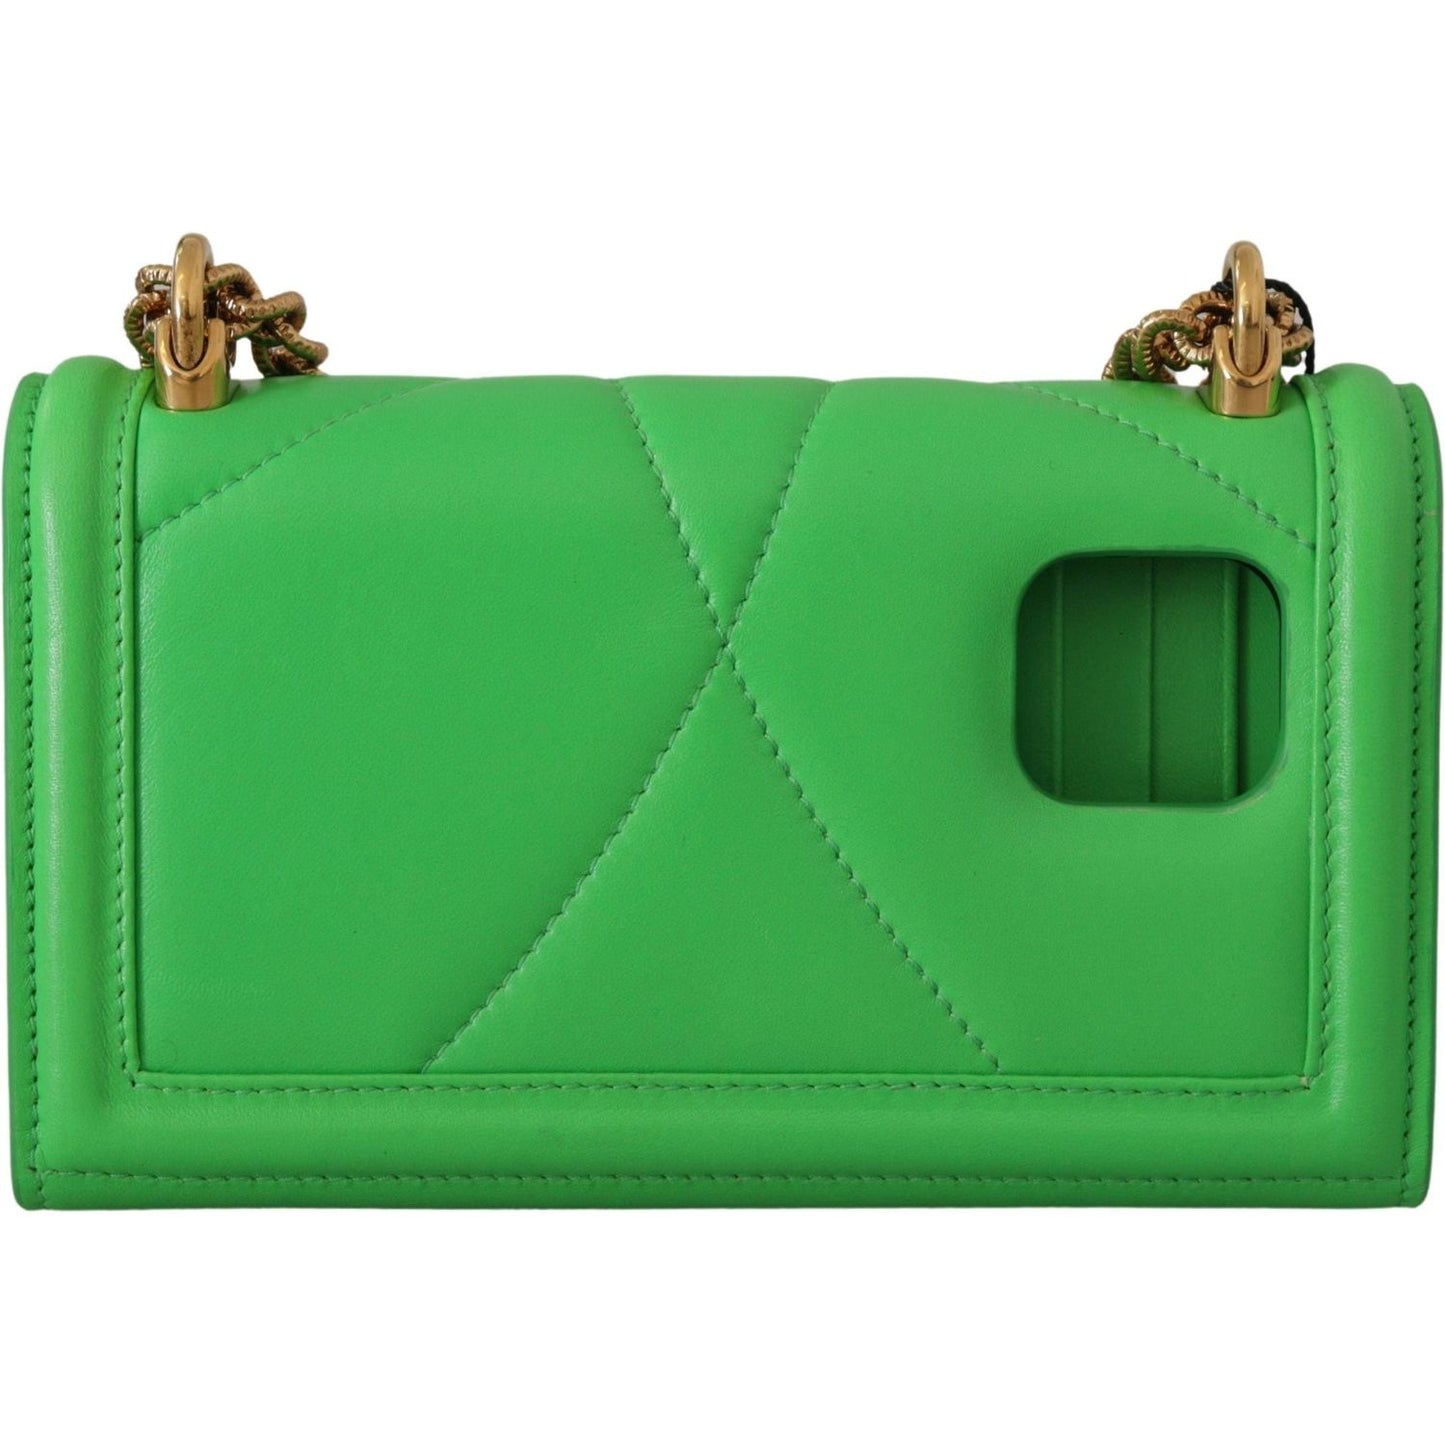 Dolce & Gabbana Elegant Leather iPhone Wallet Case with Chain green-leather-devotion-cardholder-iphone-11-pro-wallet IMG_3538-1-17ce9557-3d0.jpg